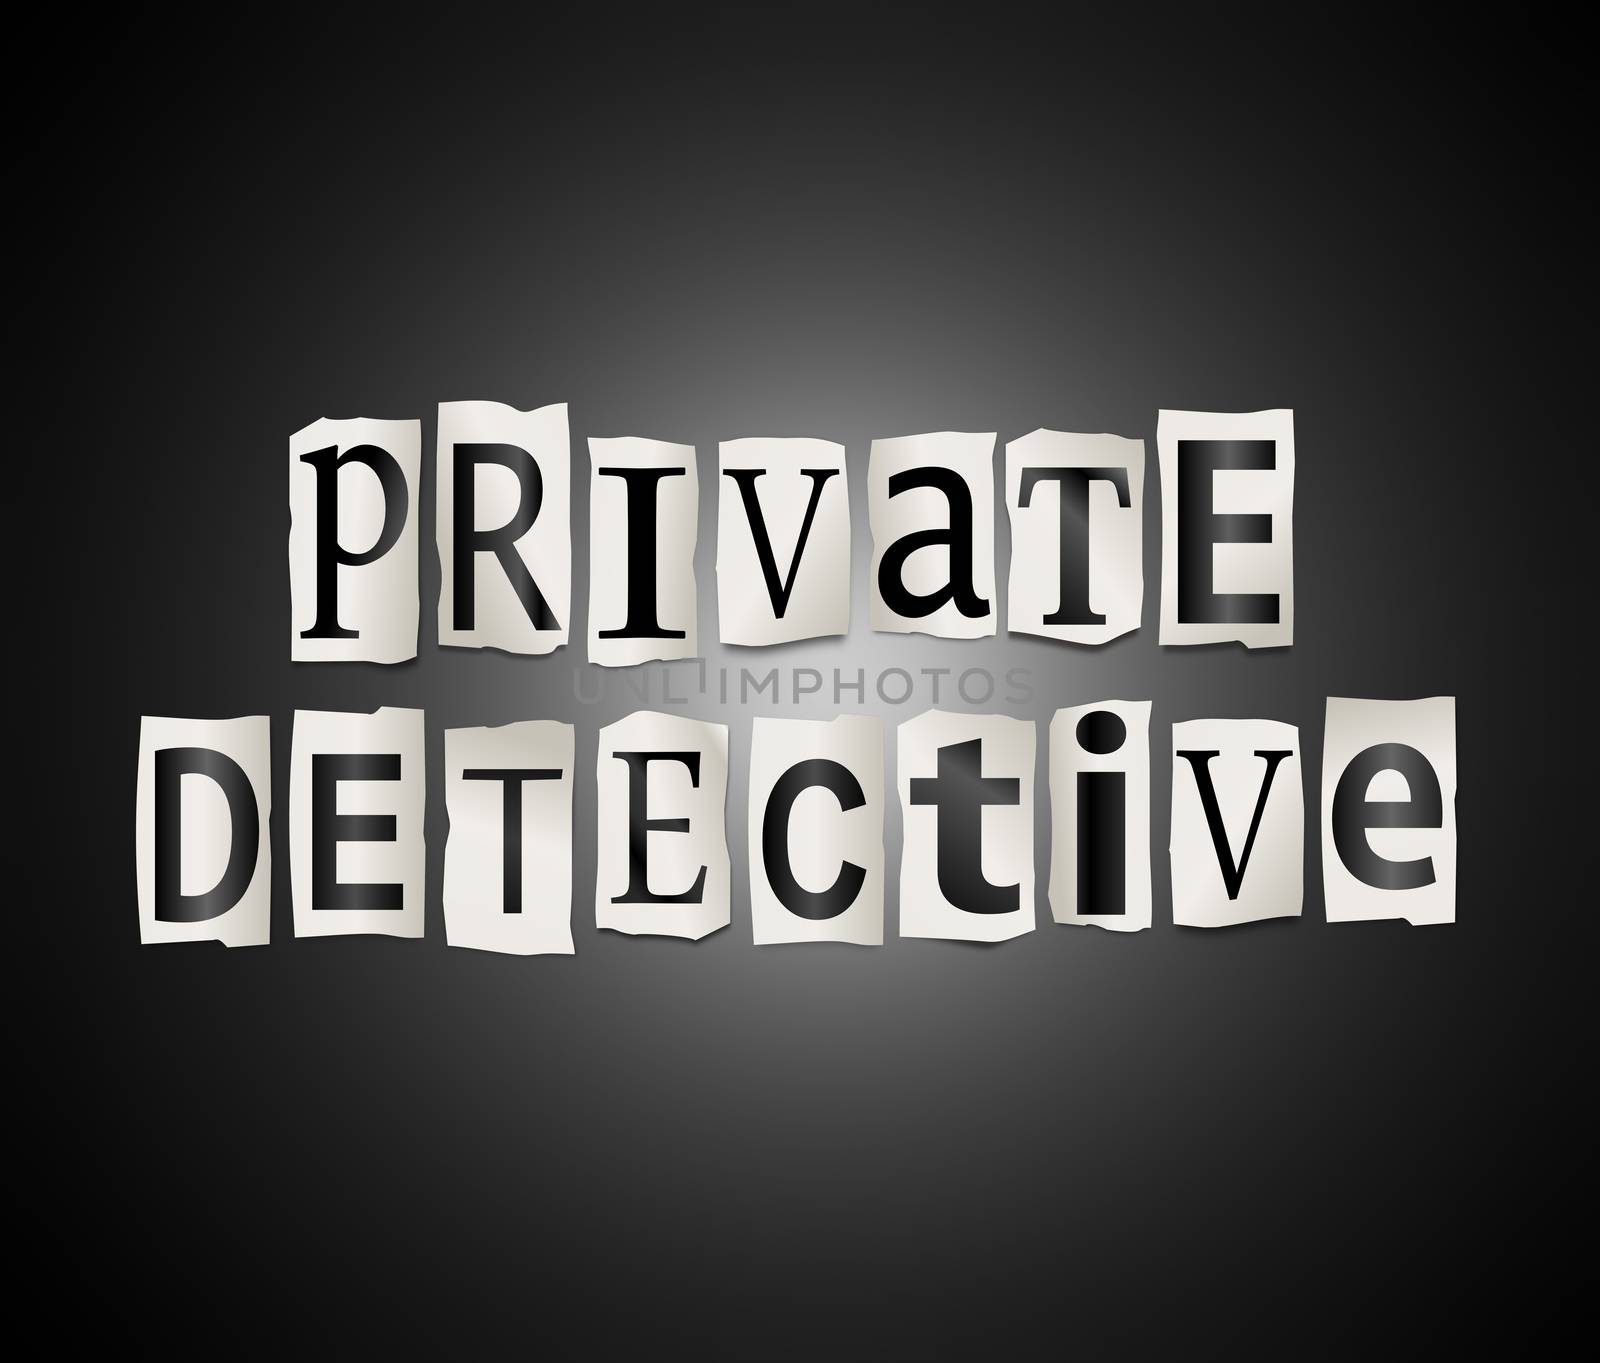 Illustration depicting a set of cut out printed letters arranged to form the words private detective.